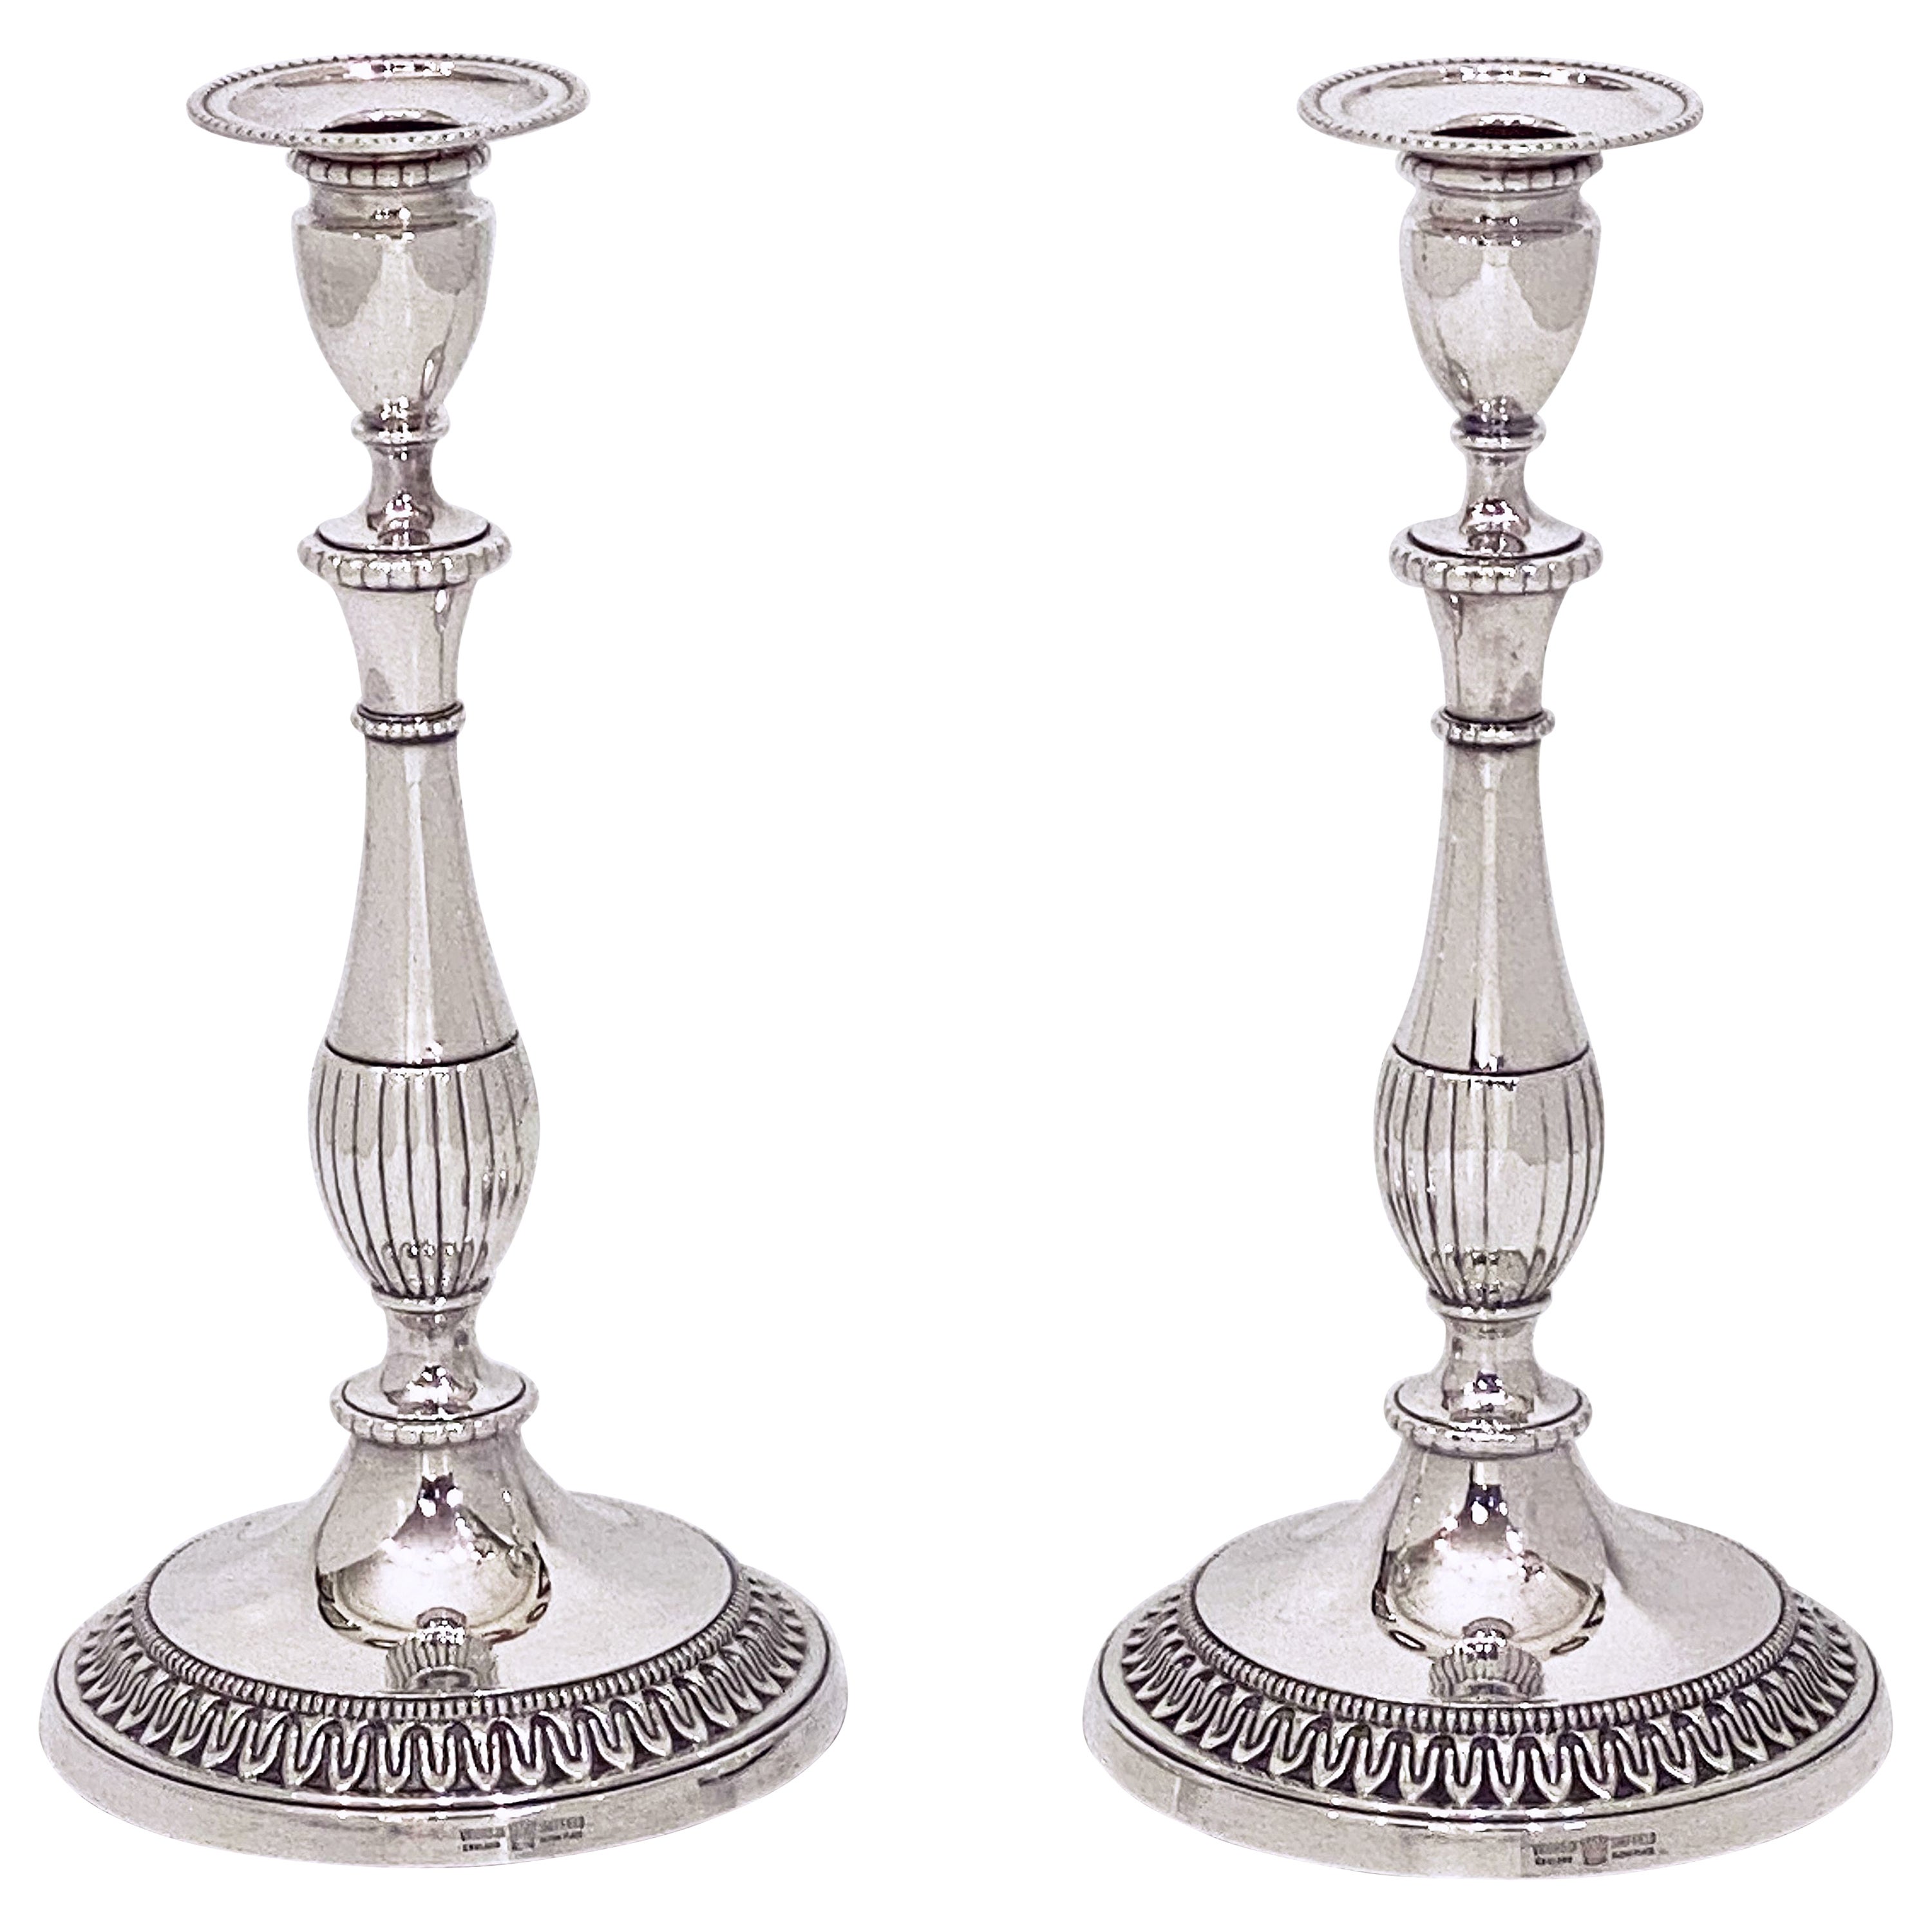 Pair of English Silver Candle Holders or Candlesticks For Sale